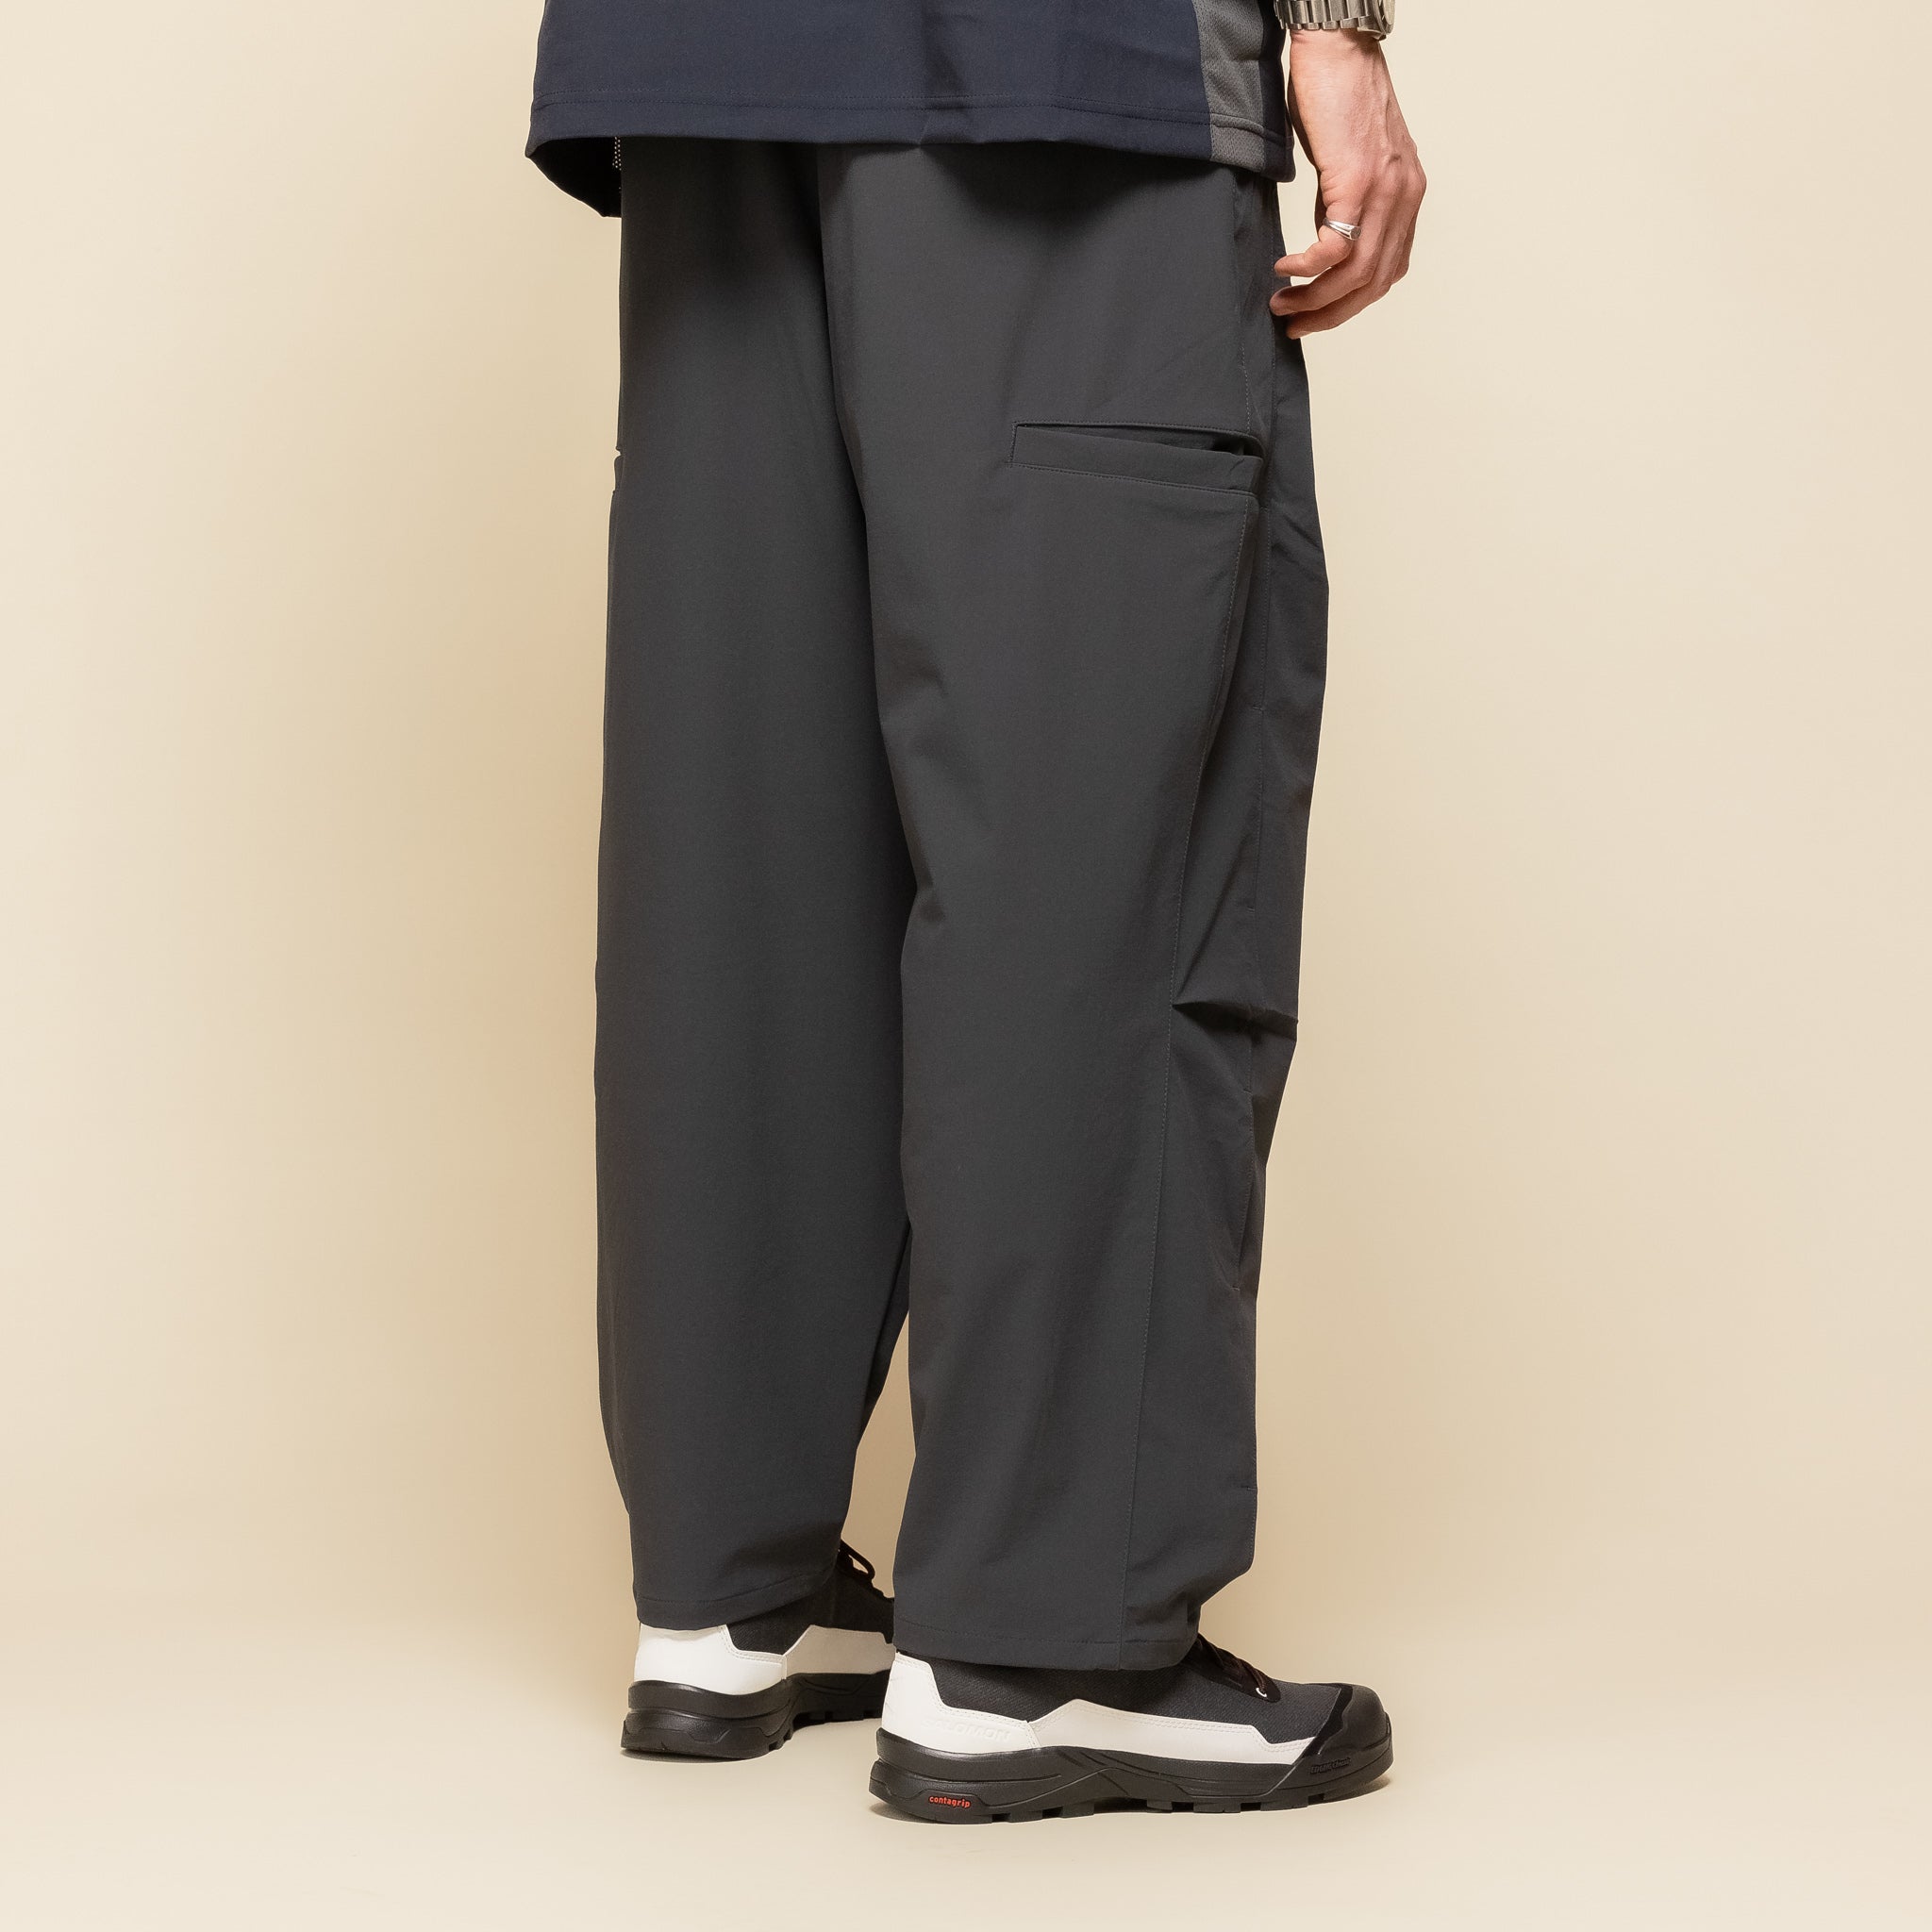 GOOPiMADE x Masterpiece - “MEquip-P1” Double Layers Utility Trousers - Marine